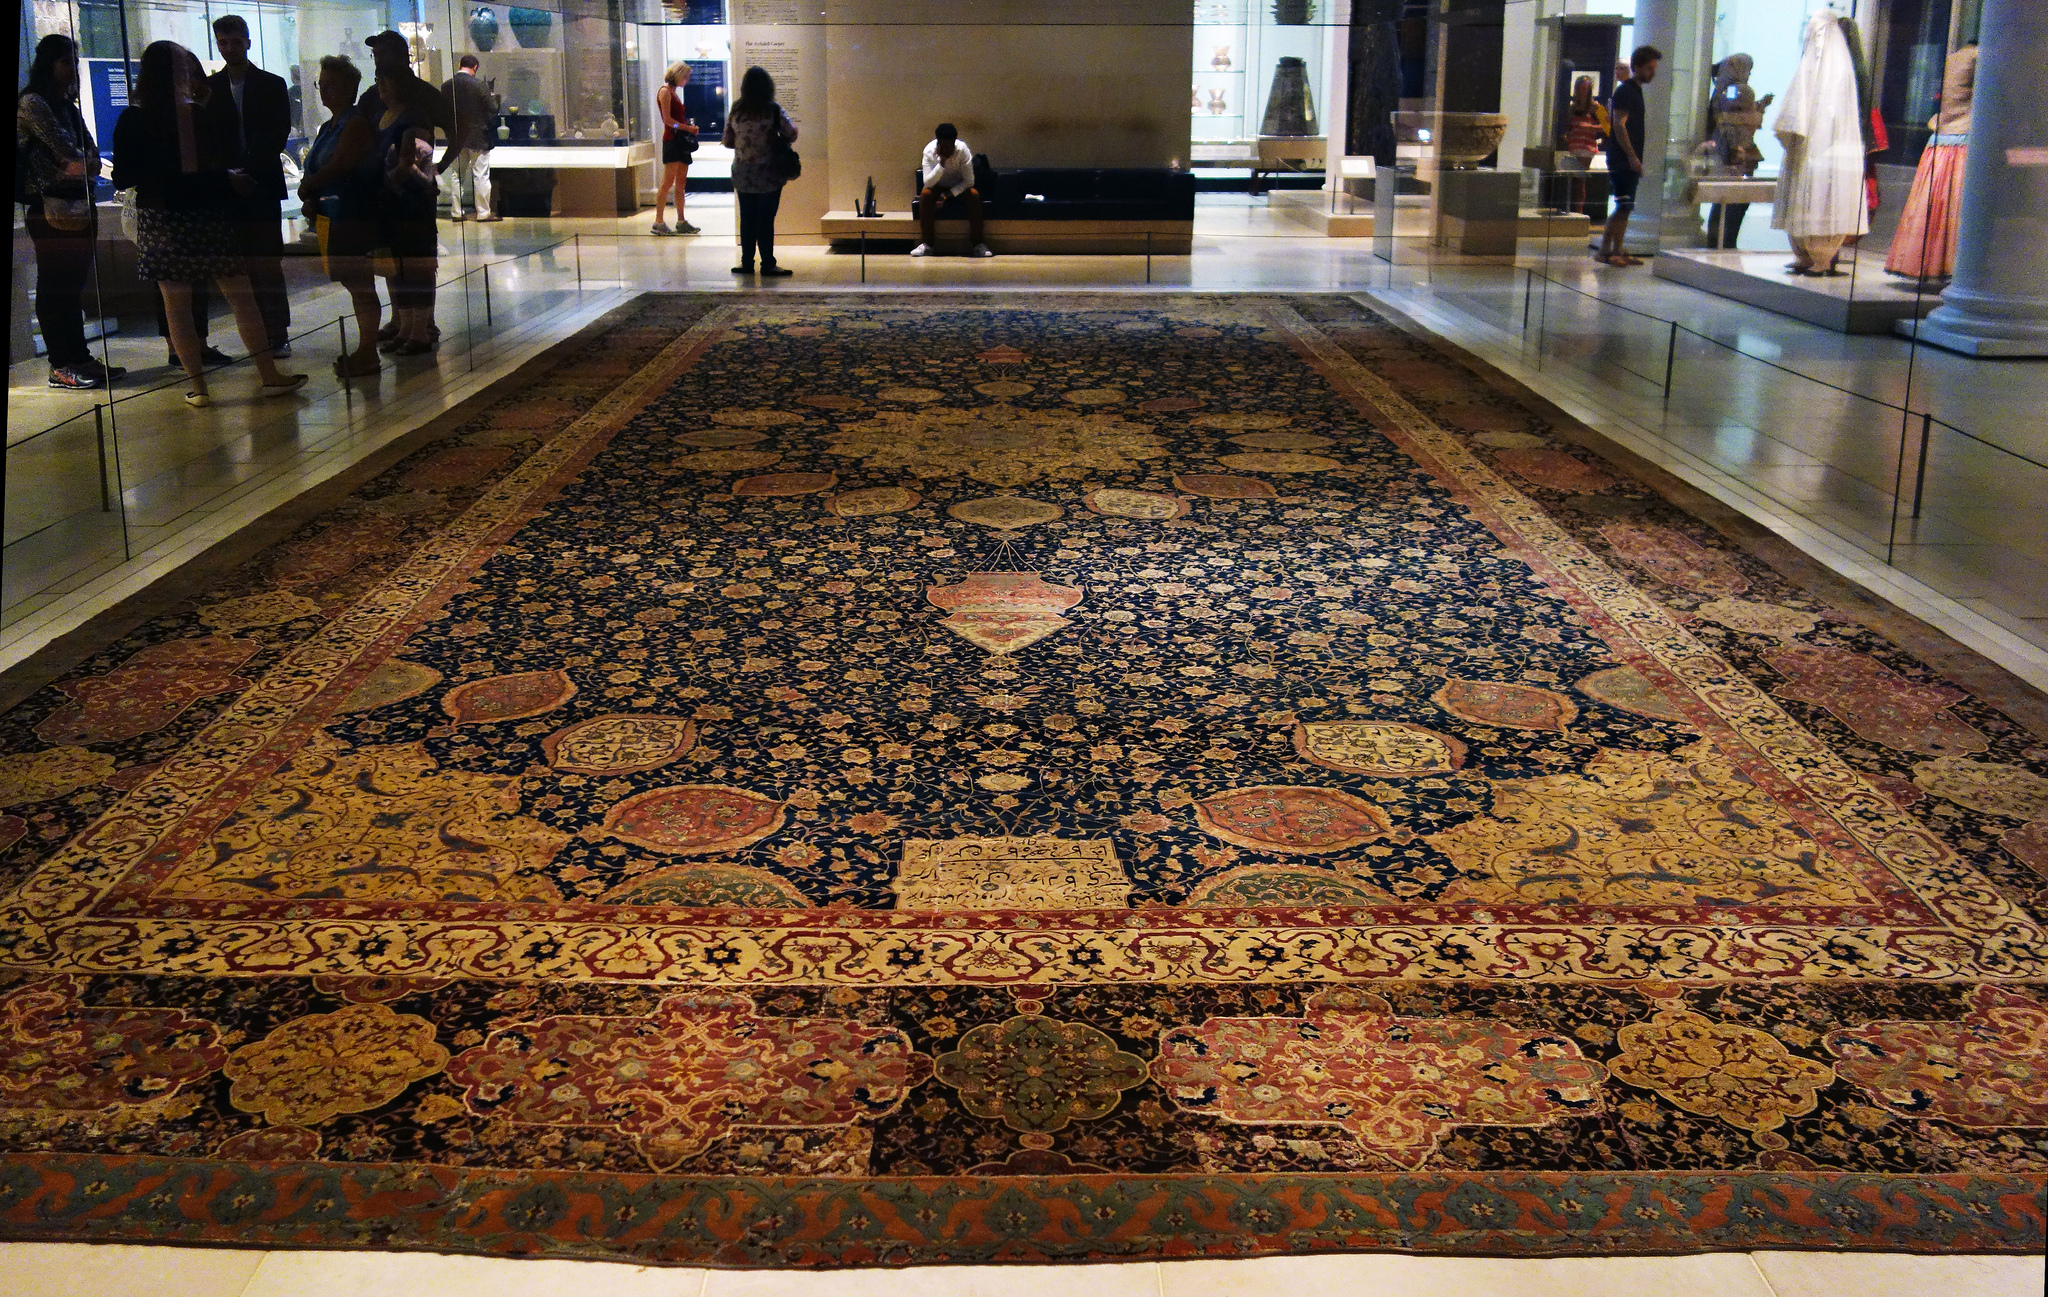 Medallion Carpet, The Ardabil Carpet, Unknown artist (Maqsud Kashani is named on the carpet’s inscription), Persian: Safavid Dynasty, silk warps and wefts with wool pile (25 million knots, 340 per sq. inch), 1539-40 C.E., Tabriz, Kashan, Isfahan or Kirman, Iran (Victoria and Albert Museum)